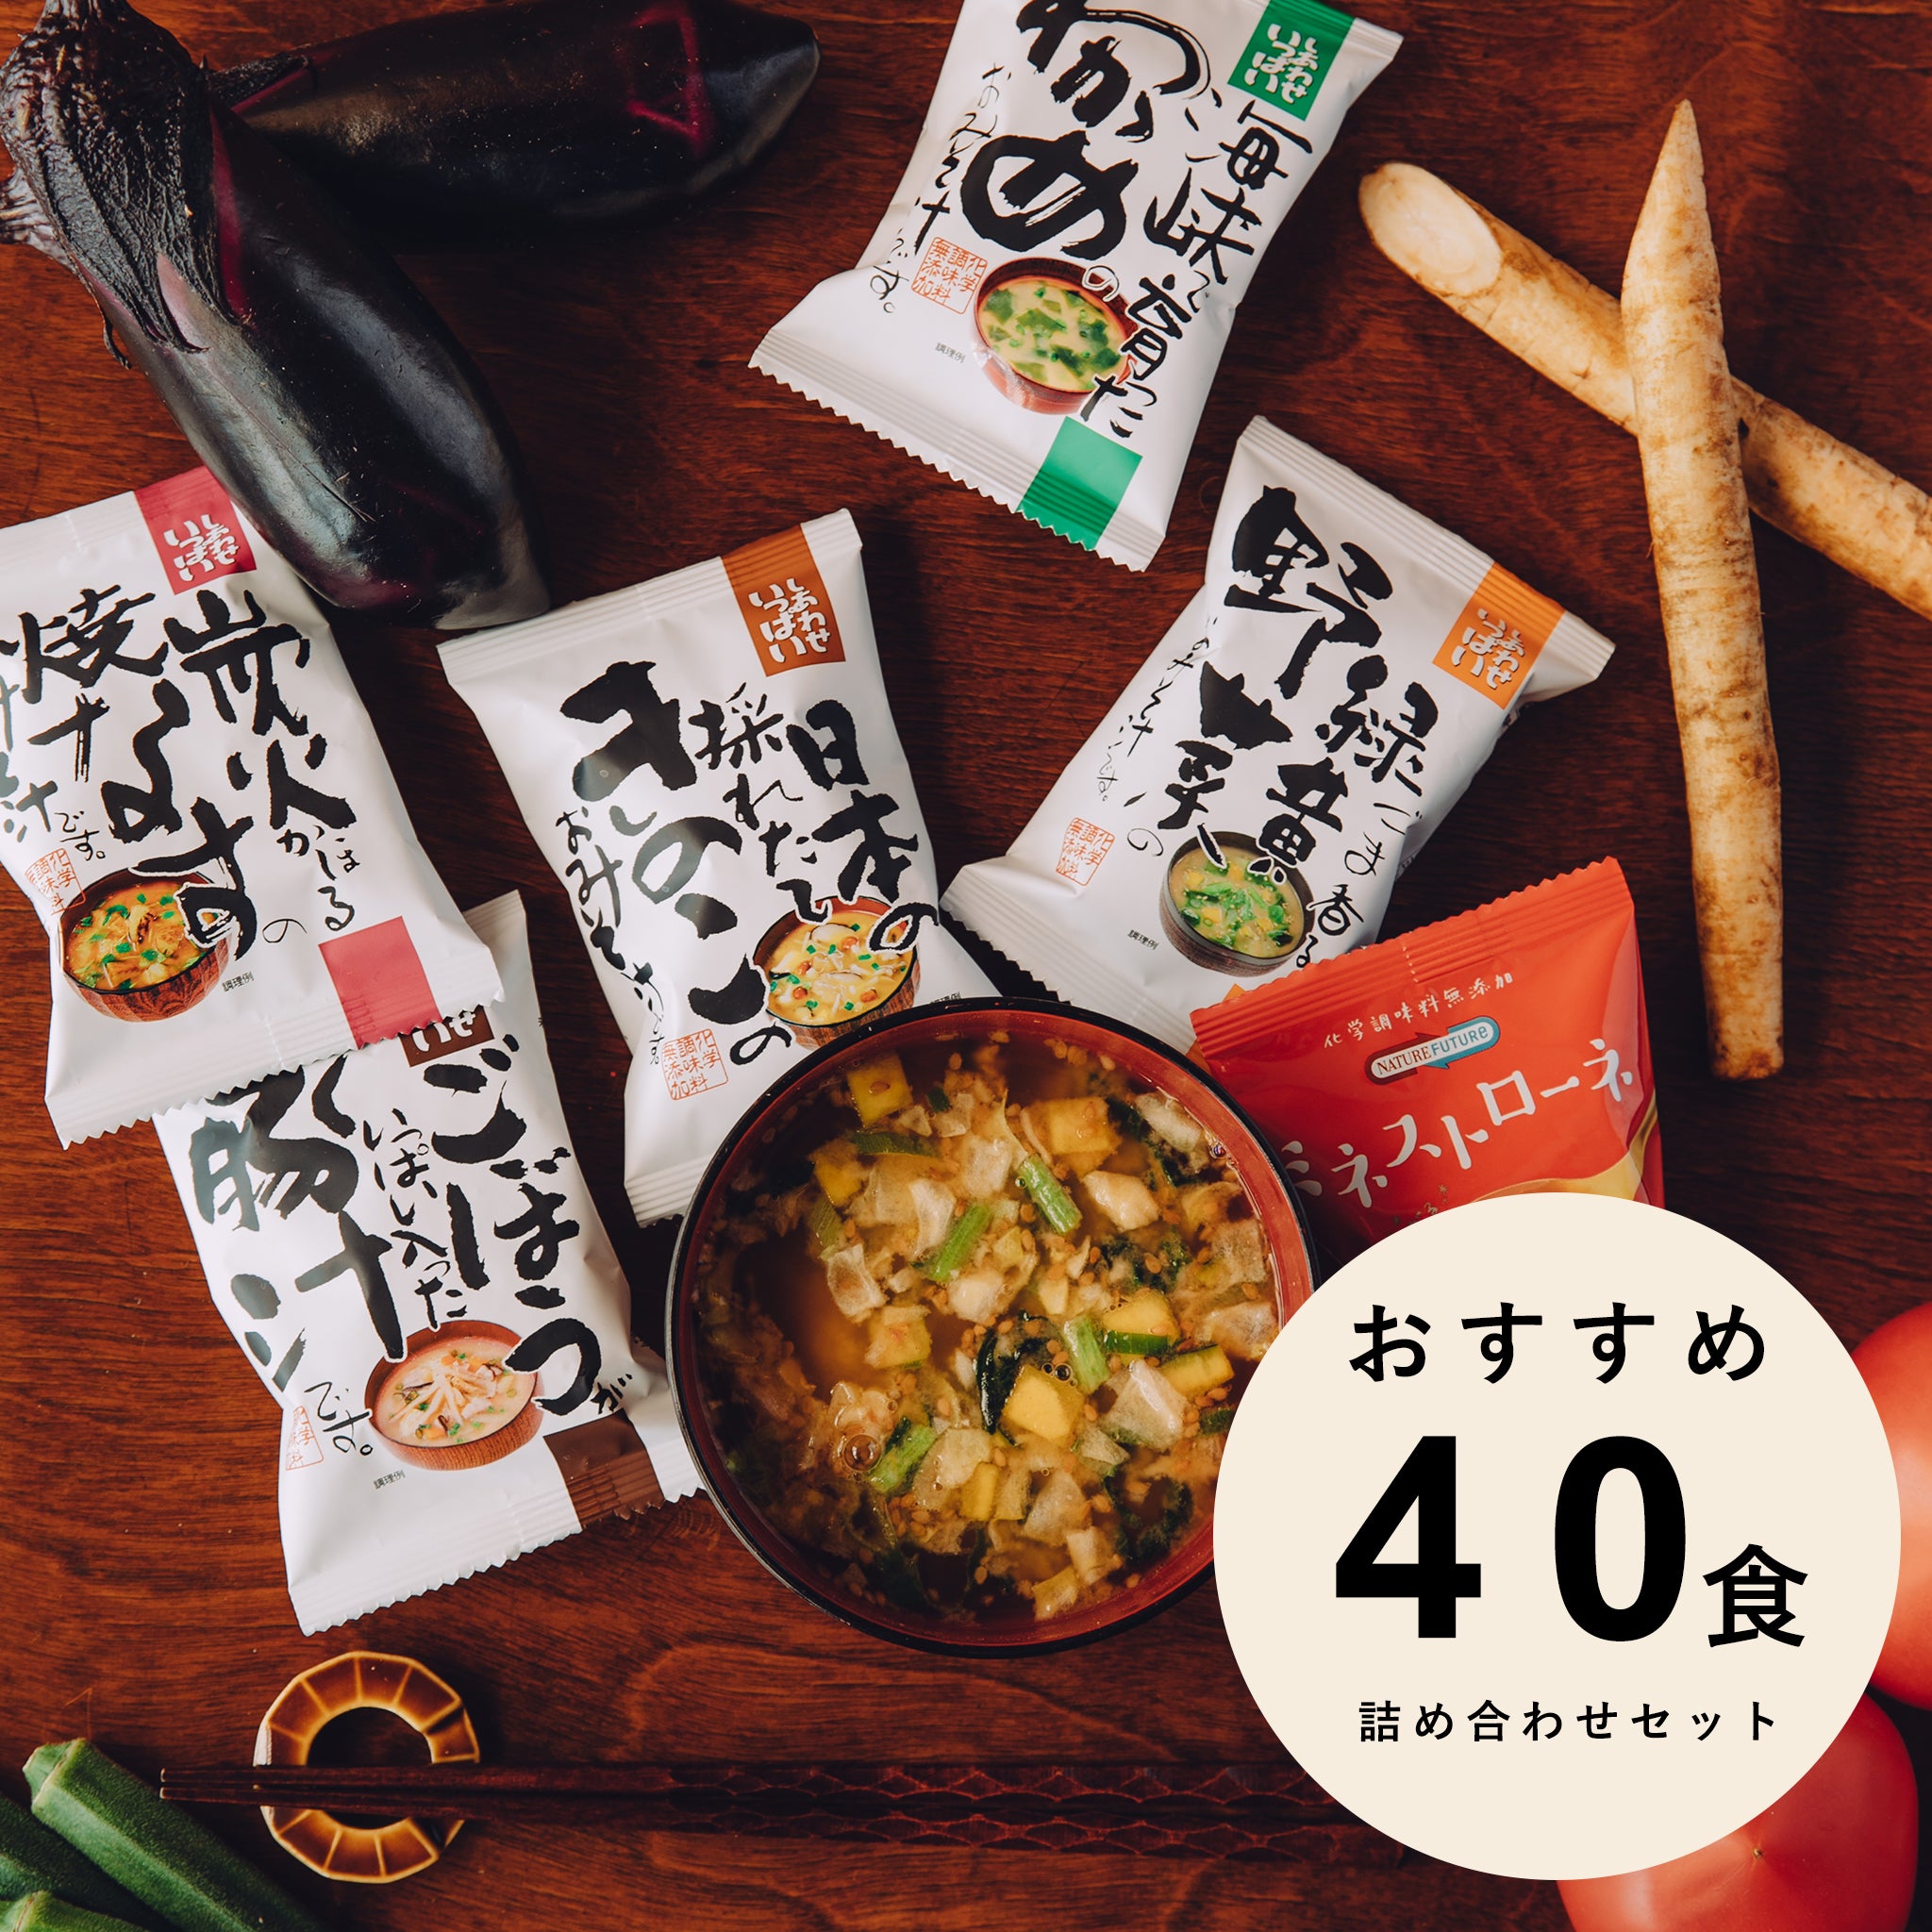 40　Freeze-dried　嶋ノ屋　food　Cosmos　Recommended　miso　set　コスモス食品　soup　meals